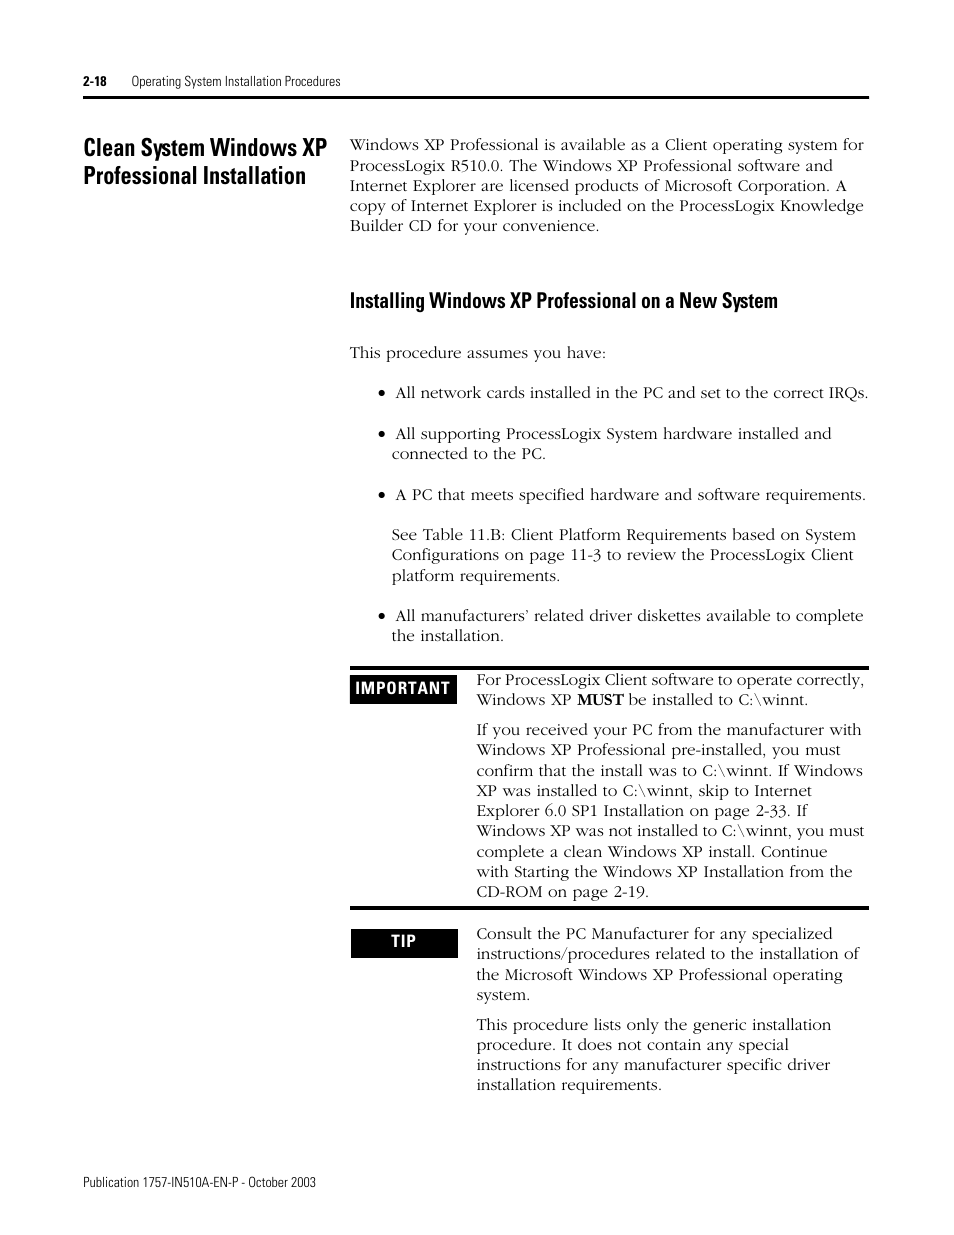 Clean system windows xp professional installation, Installing windows xp professional on a new system | Rockwell Automation 1757-SWKIT5100 ProcessLogix R510.0 Installation and Upgrade Guide User Manual | Page 38 / 271